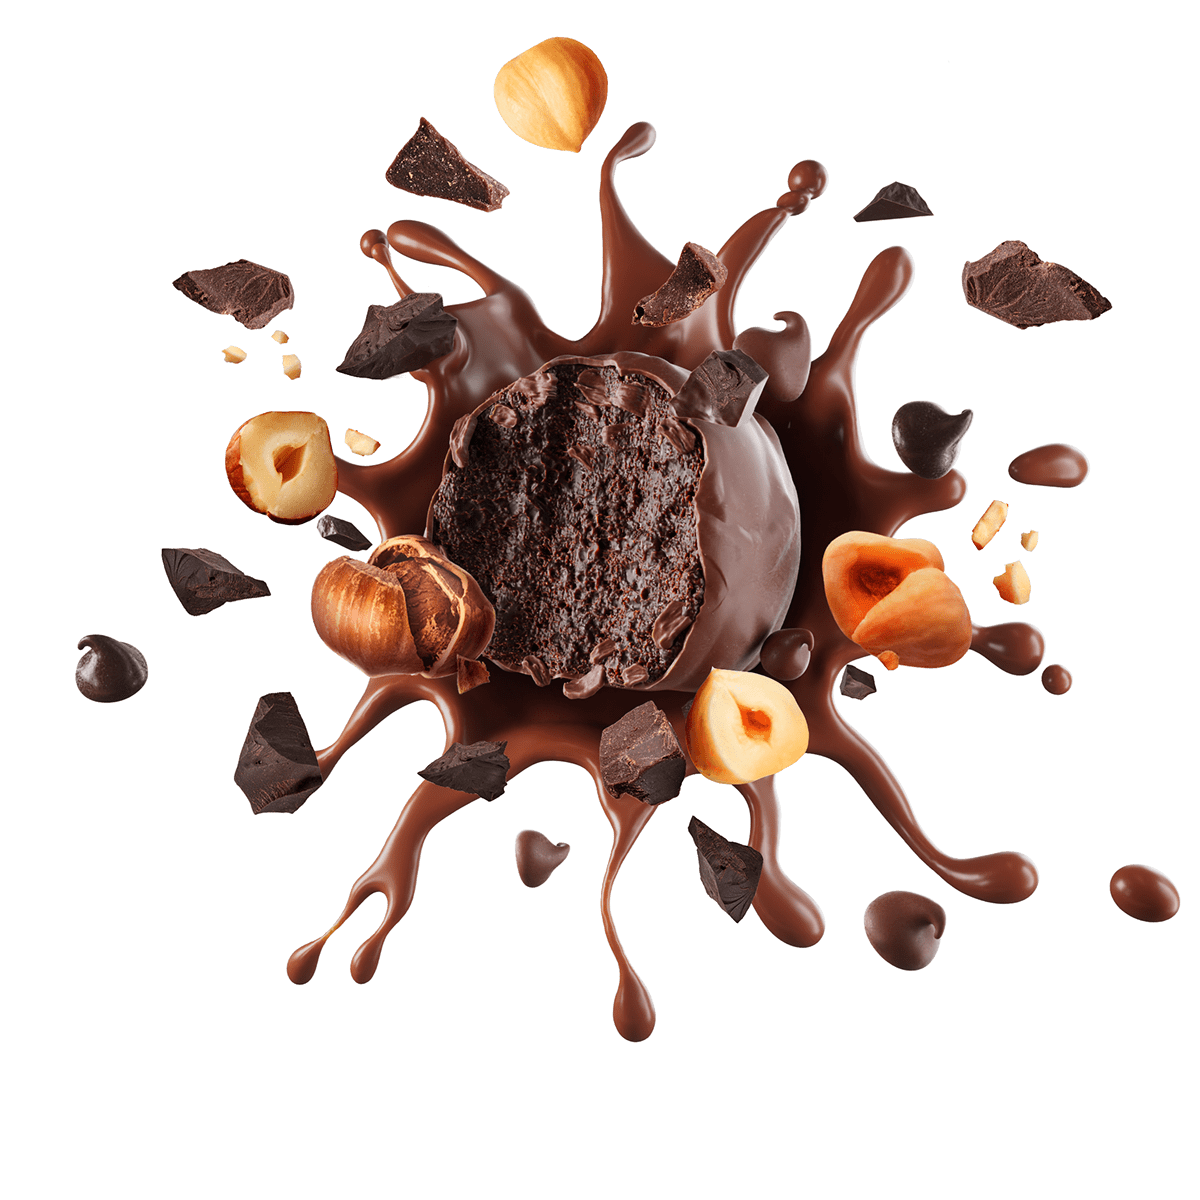 CGI Render of a truffle chocolat treat with caramel, peanut butter, with flavoured stuffing